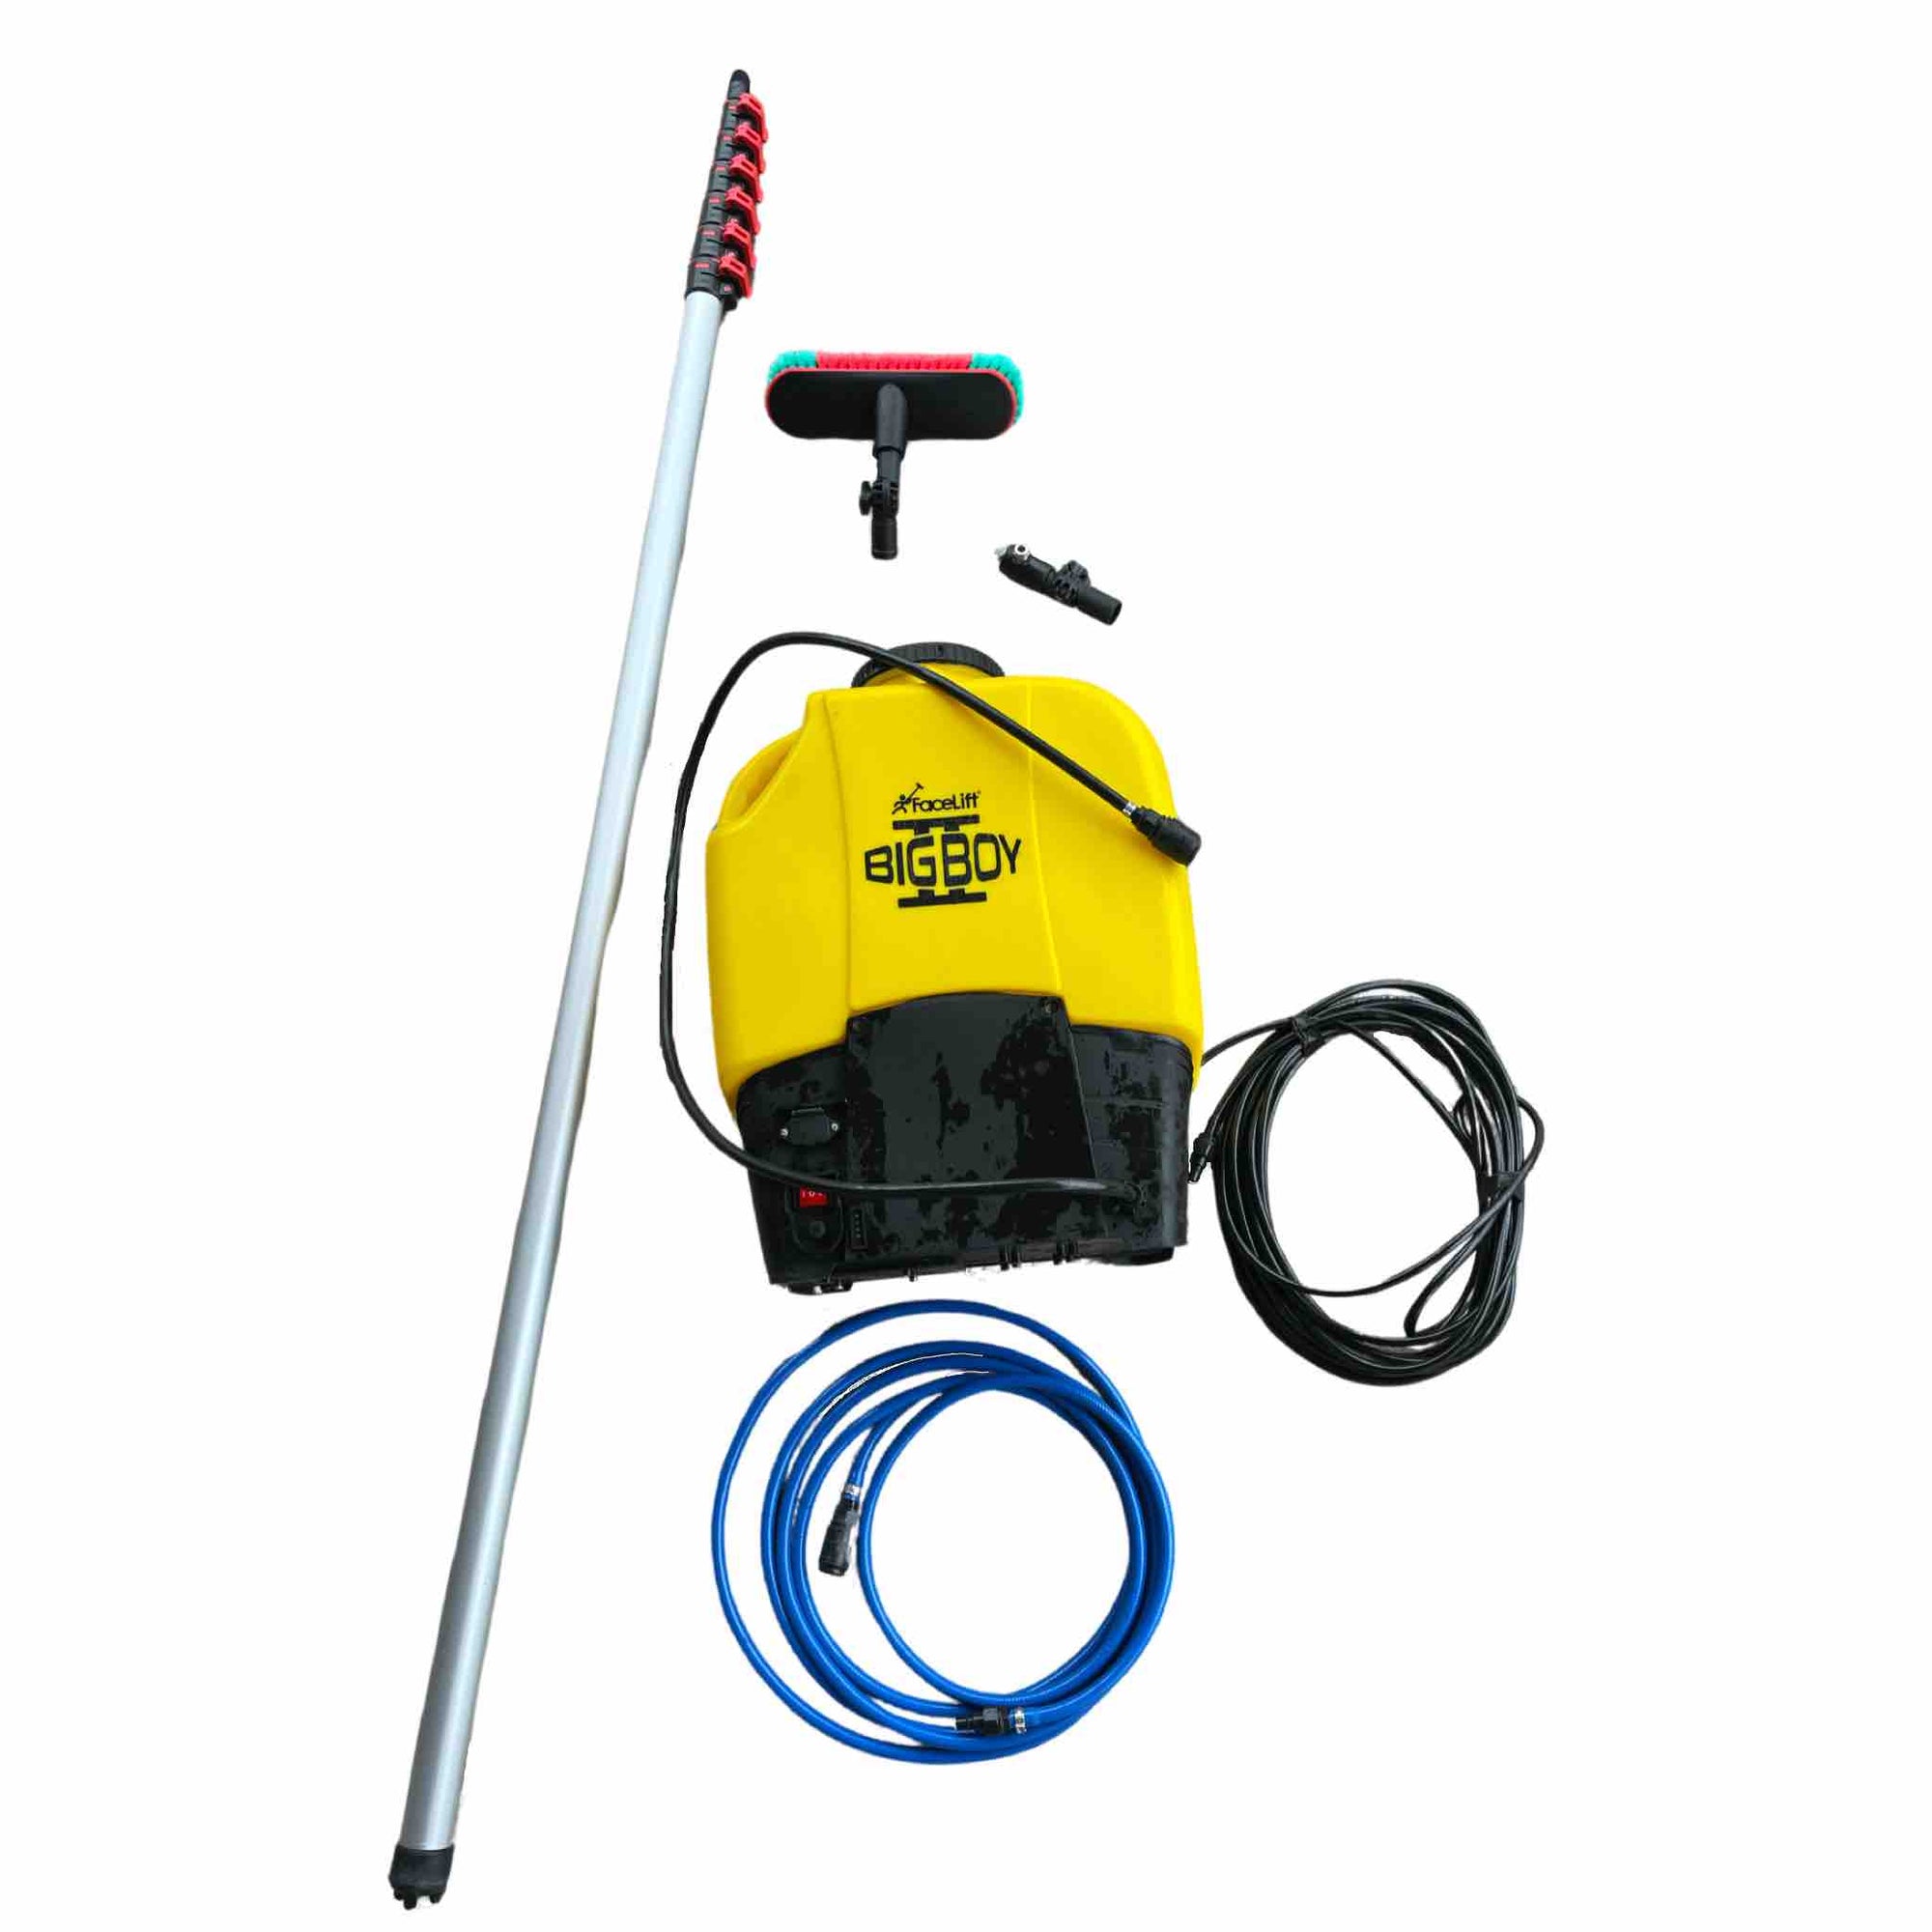 BACKPACK SPRAYER - The simplest and easiest way to start soft washing